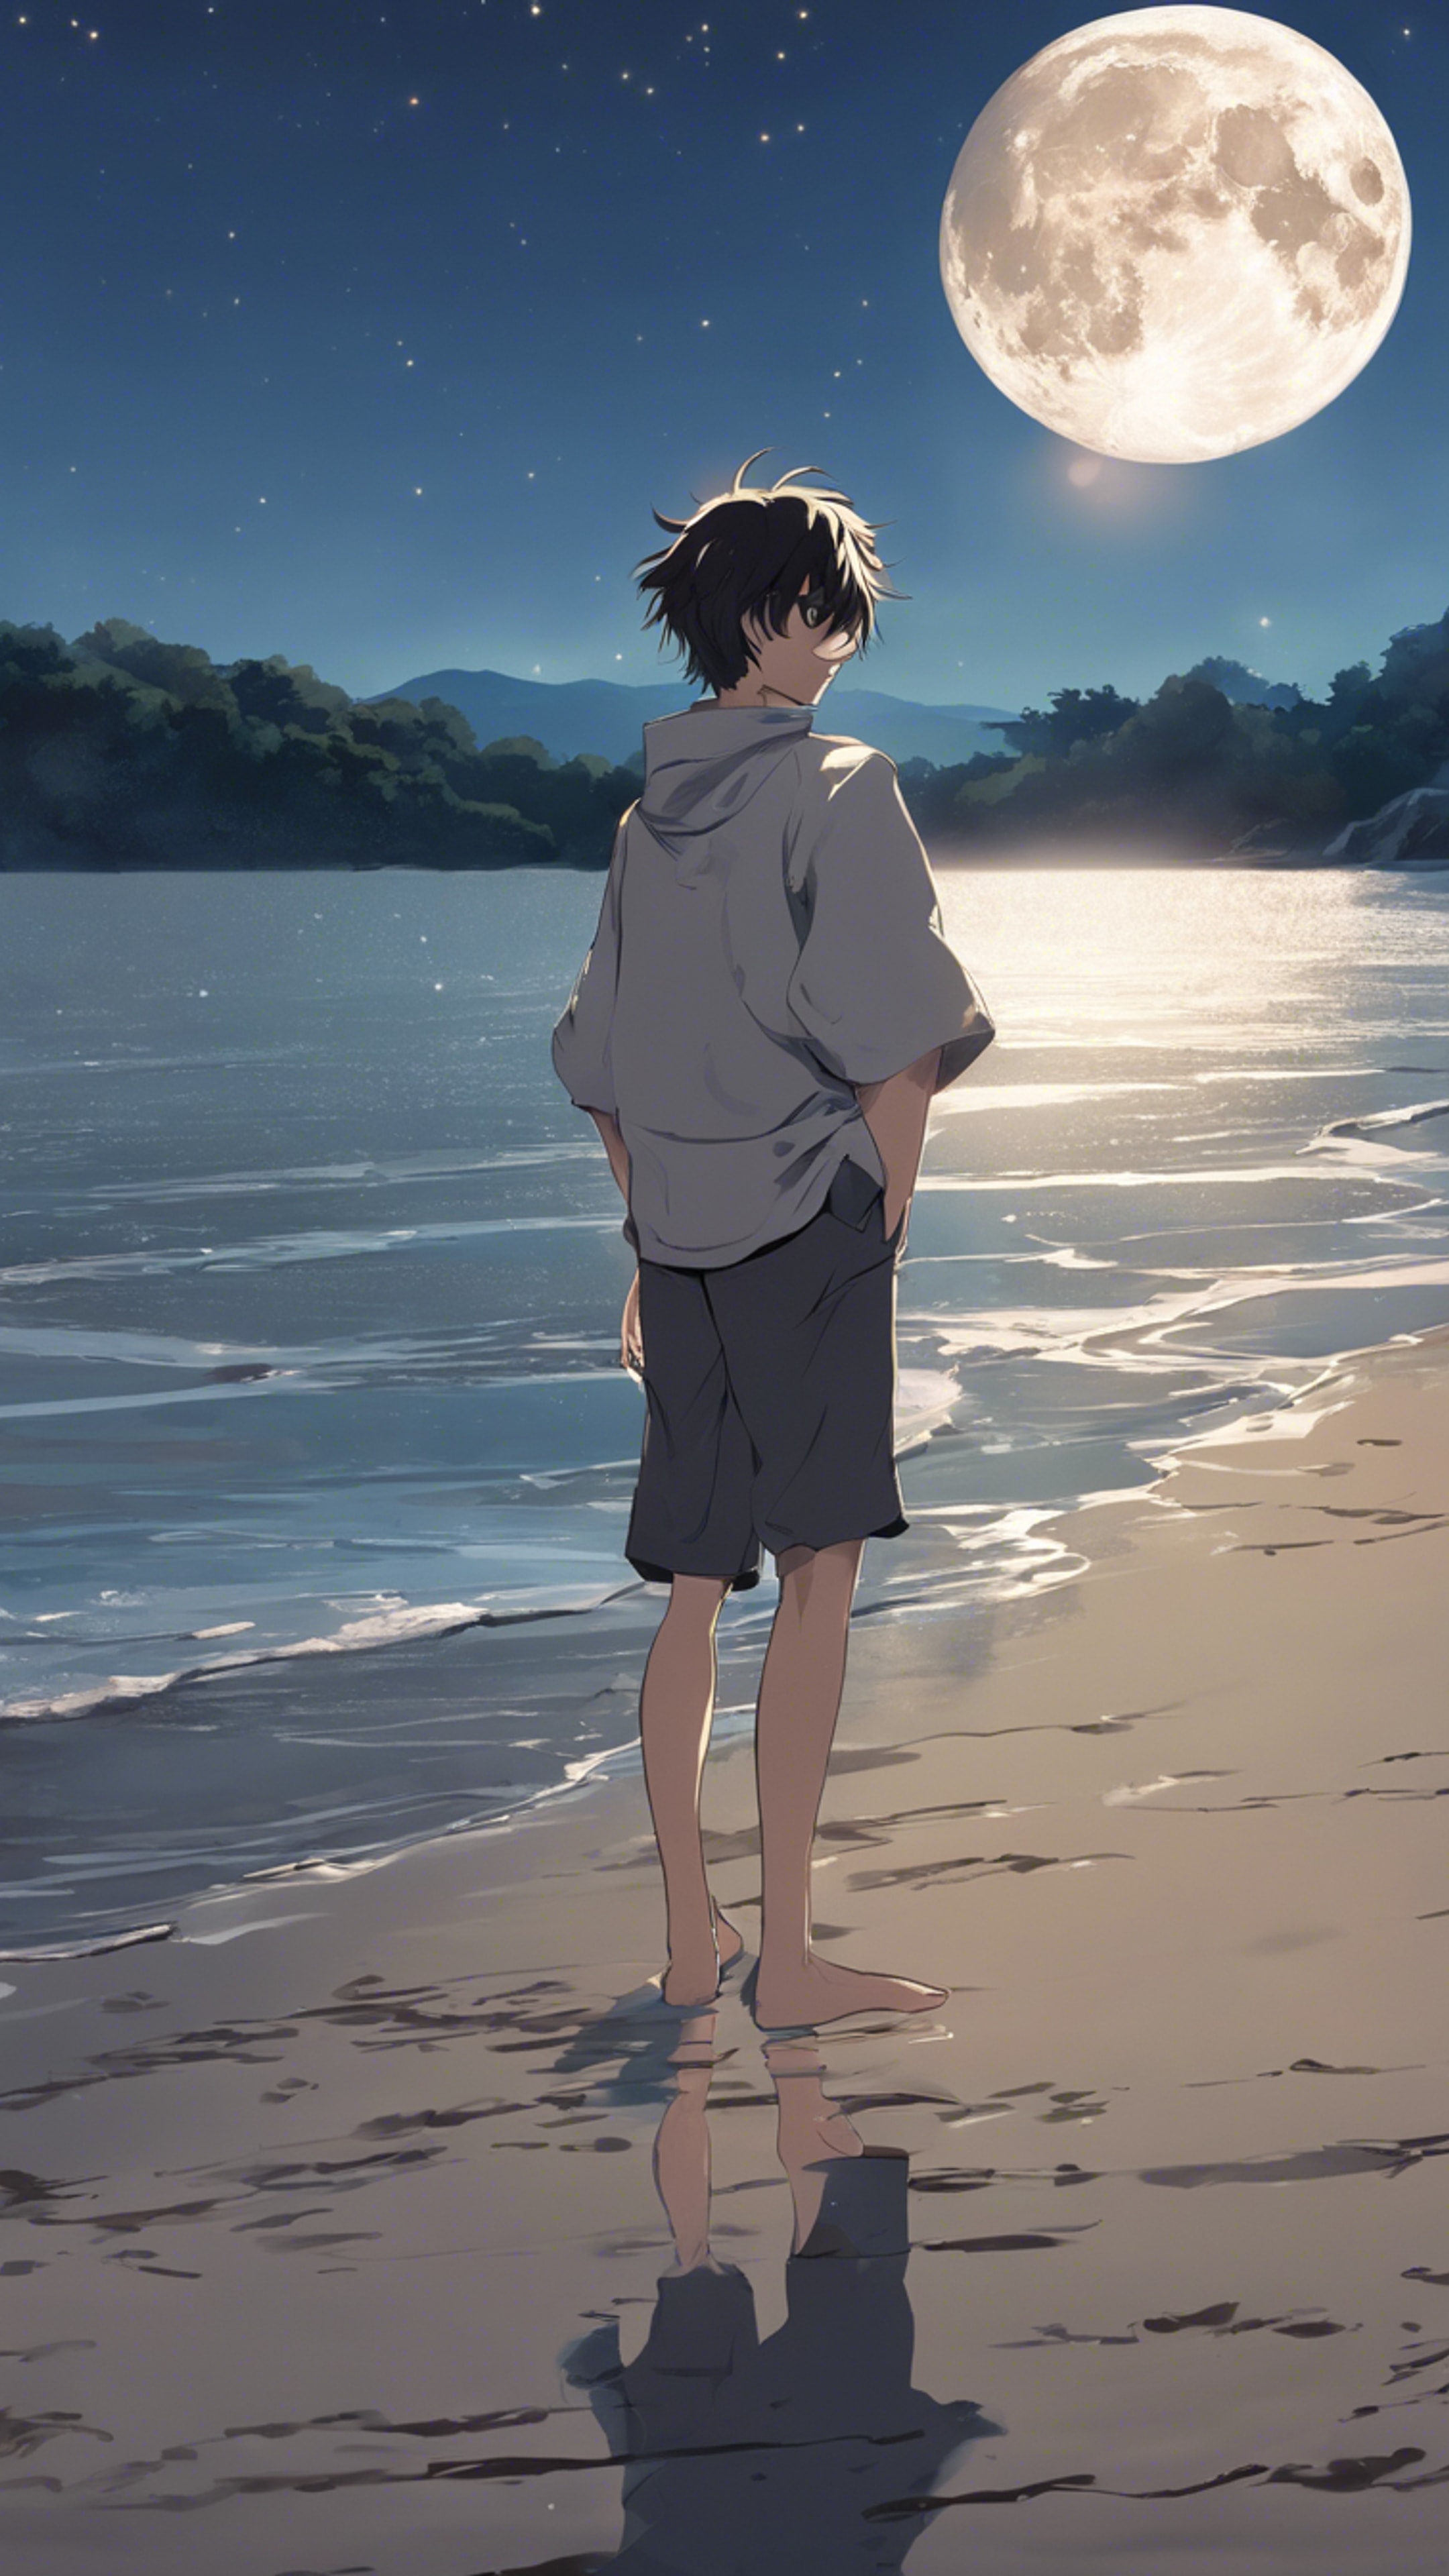 An anime boy standing barefoot on the shore, with the moon reflecting in upturned, joyous eyes. Tapeta na zeď[a80f9c3e465041ad9759]